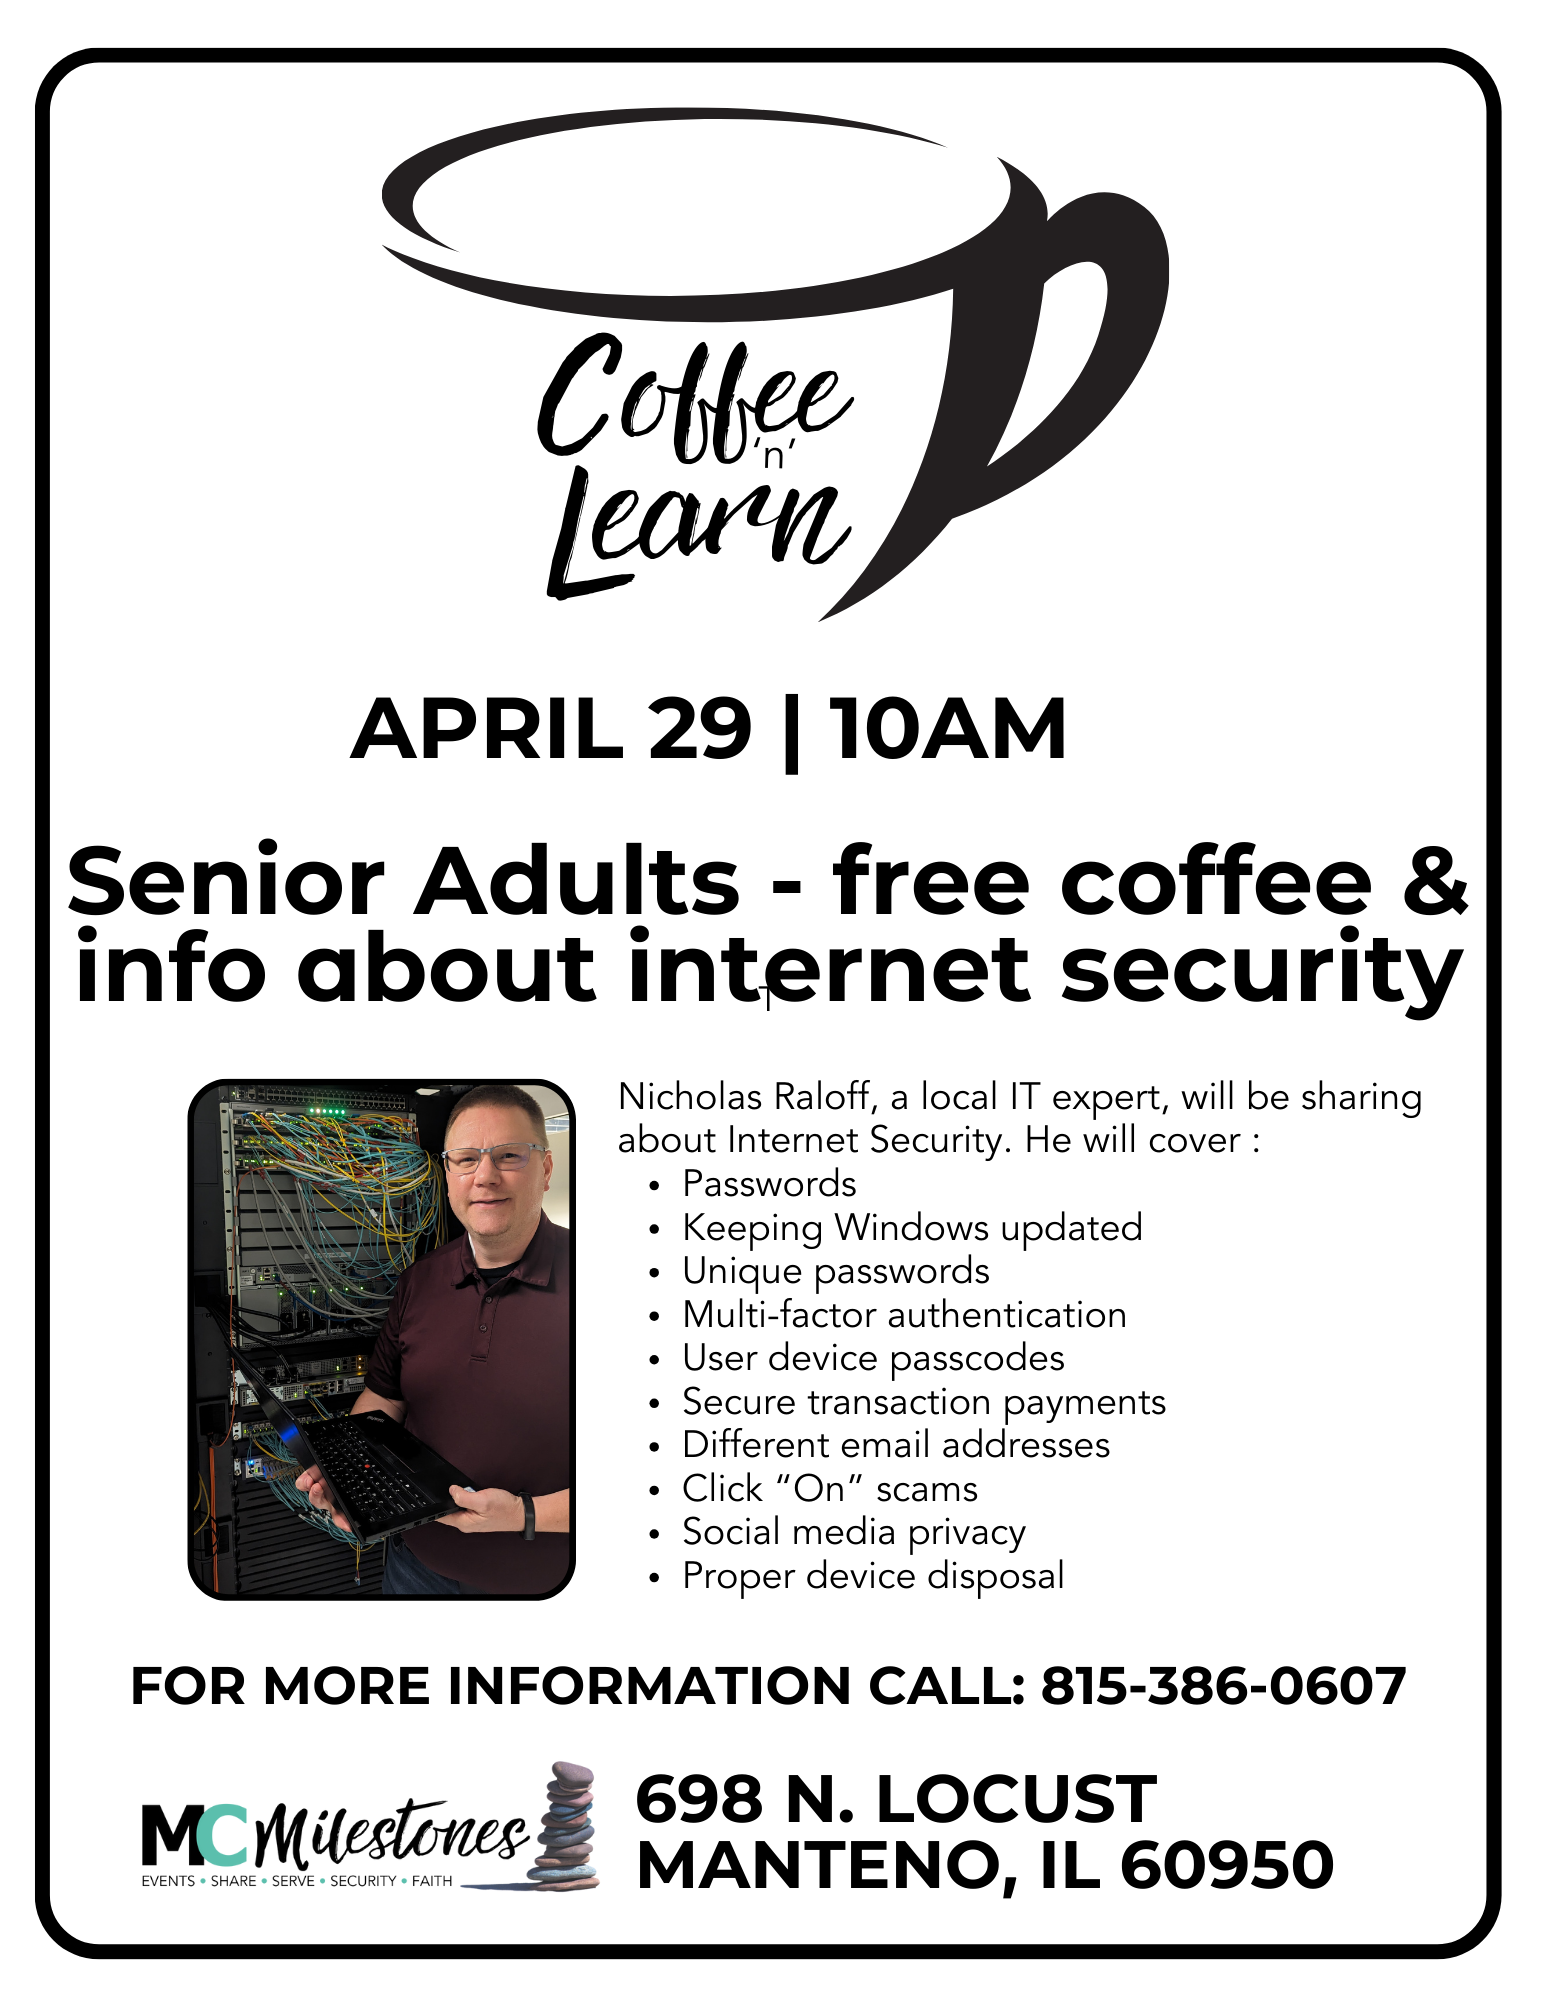 Coffee 'n' Learn for ages 55+ Sponsored by MC Milestones Senior Adult Initiative